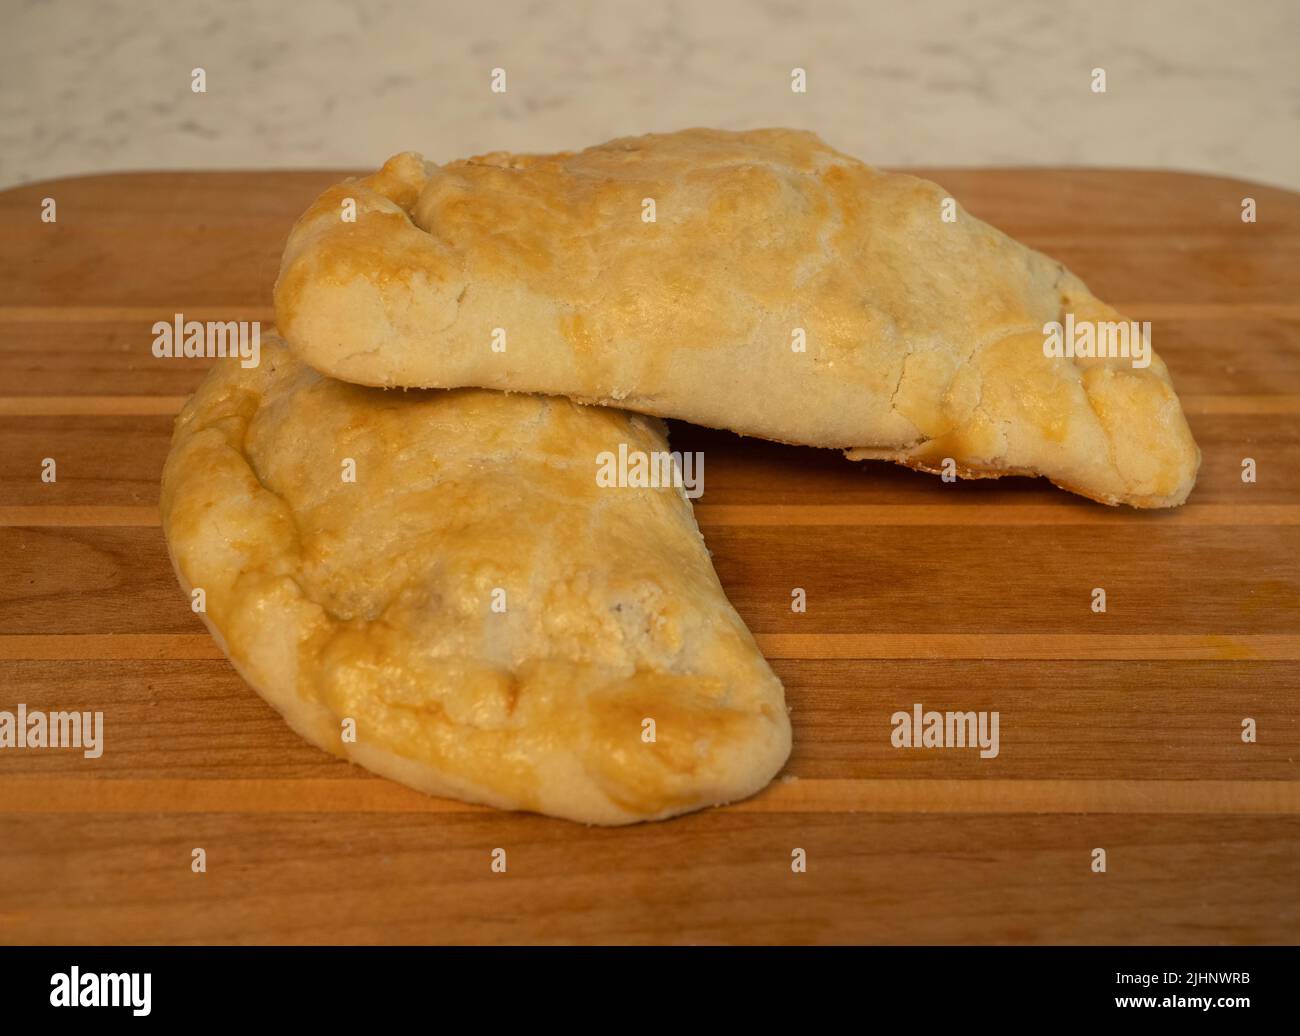 Two fresh baked beef and potato pasties on a wooden cutting board. Stock Photo